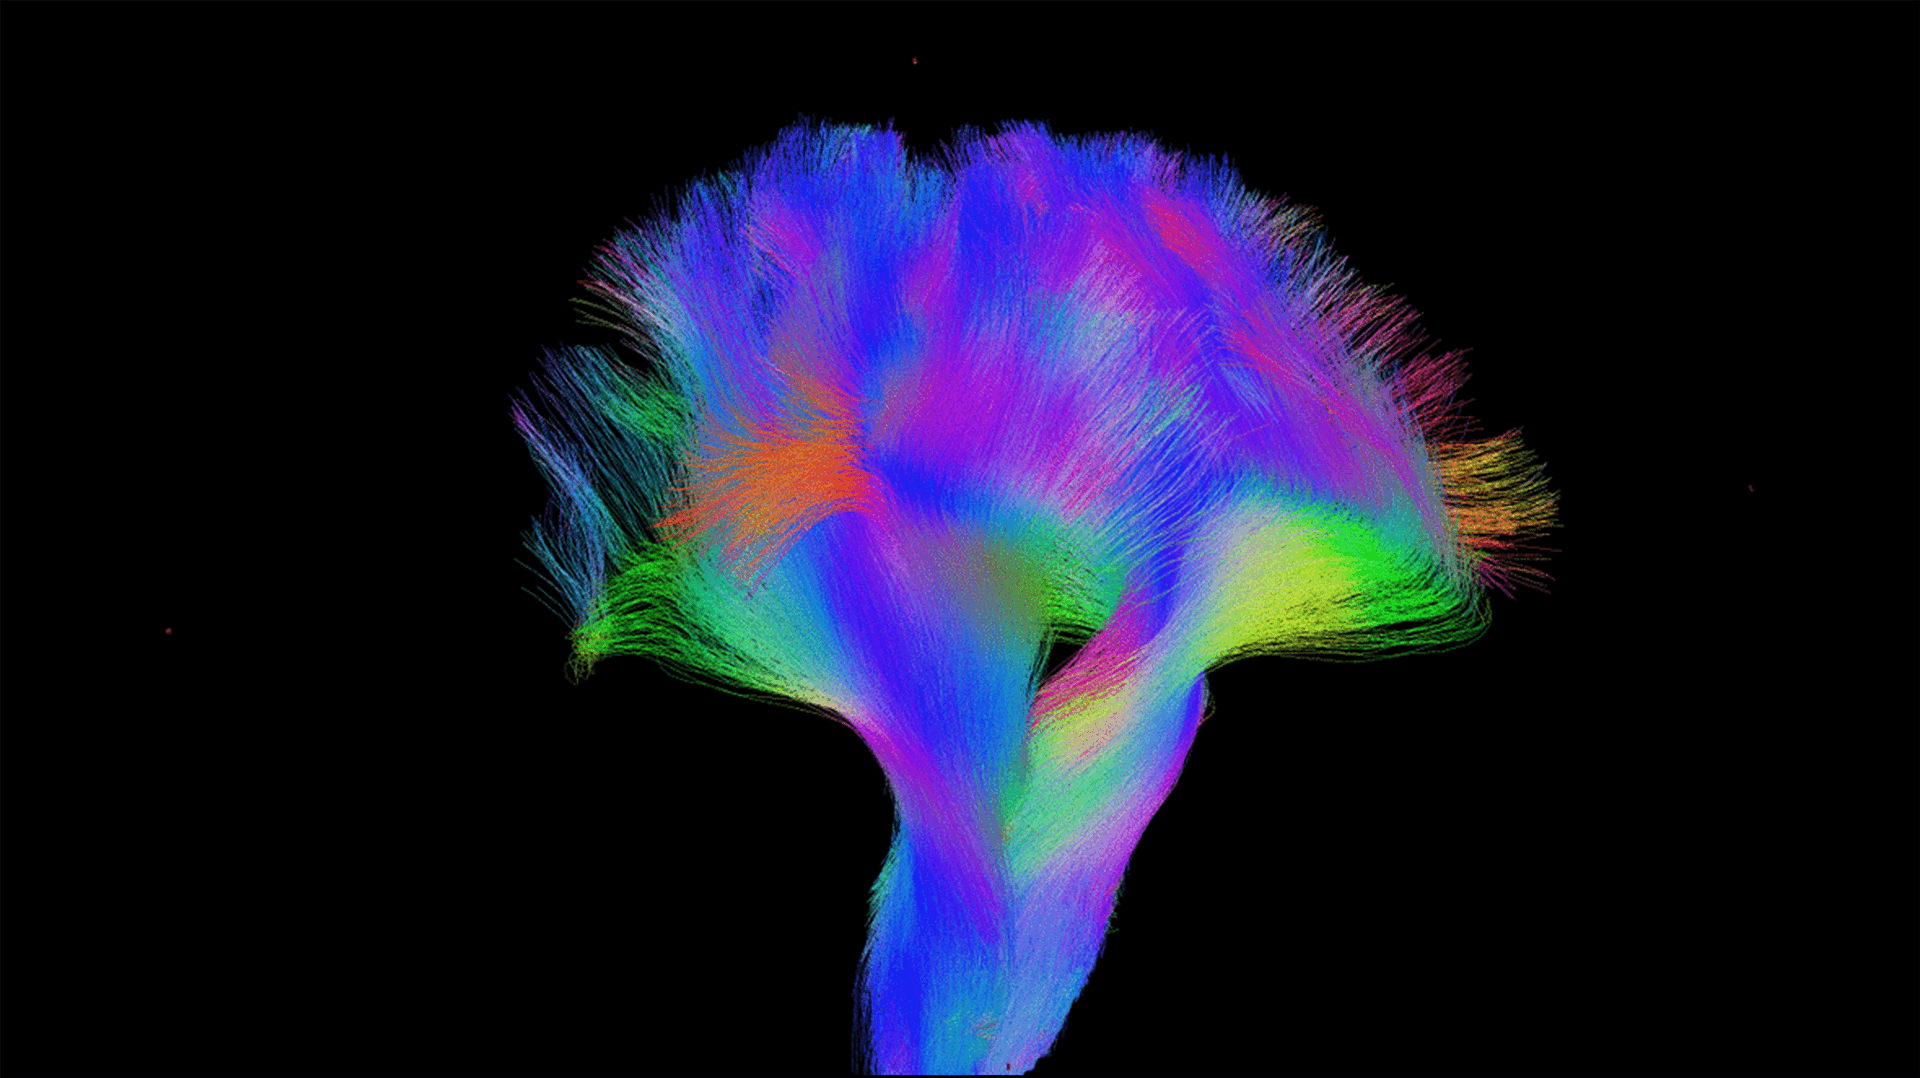 Multicolored image of the neural connections within a brain.